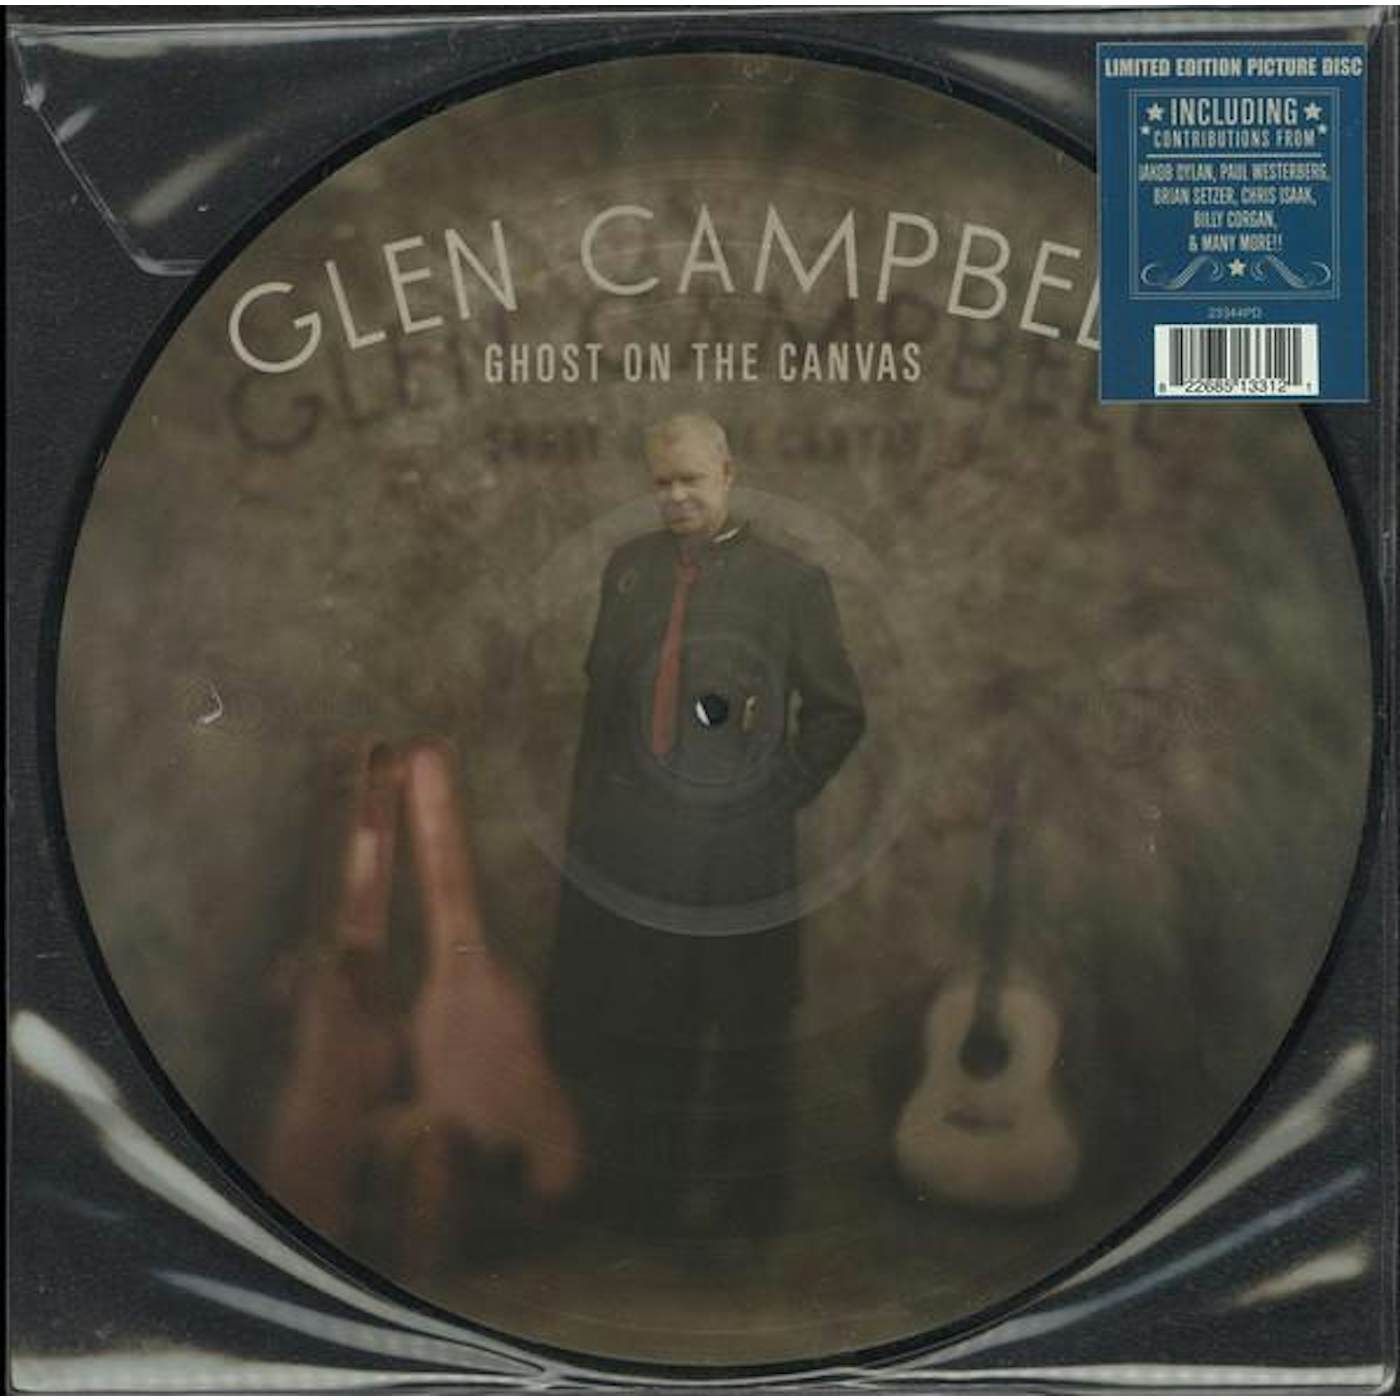 Glen Campbell GHOST ON THE CANVAS (PICTURE DISC/DL CARD) Vinyl Record